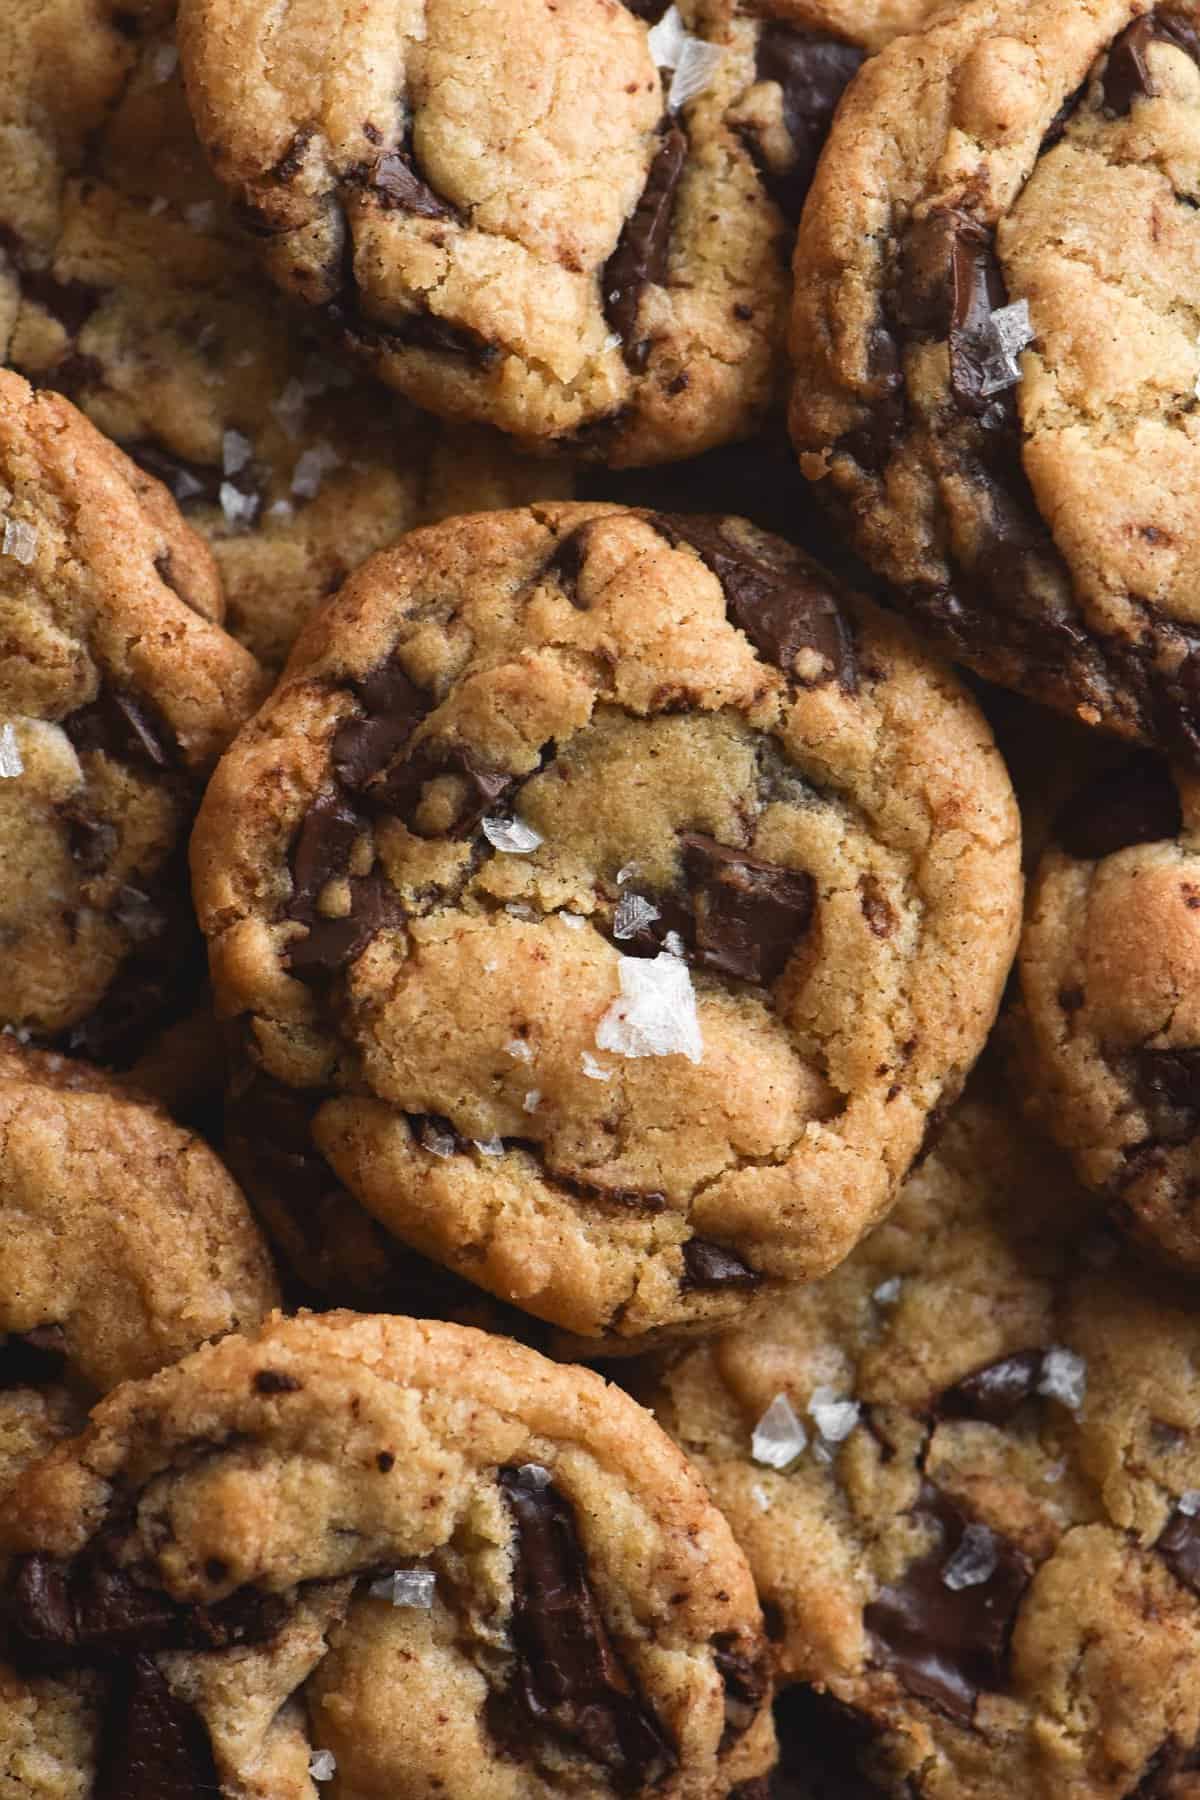 A close up aerial view of a stack of gluten free vegan choc chip cookies. The cookies are piled on top of each other, each topped with a sprinkle of sea salt flakes